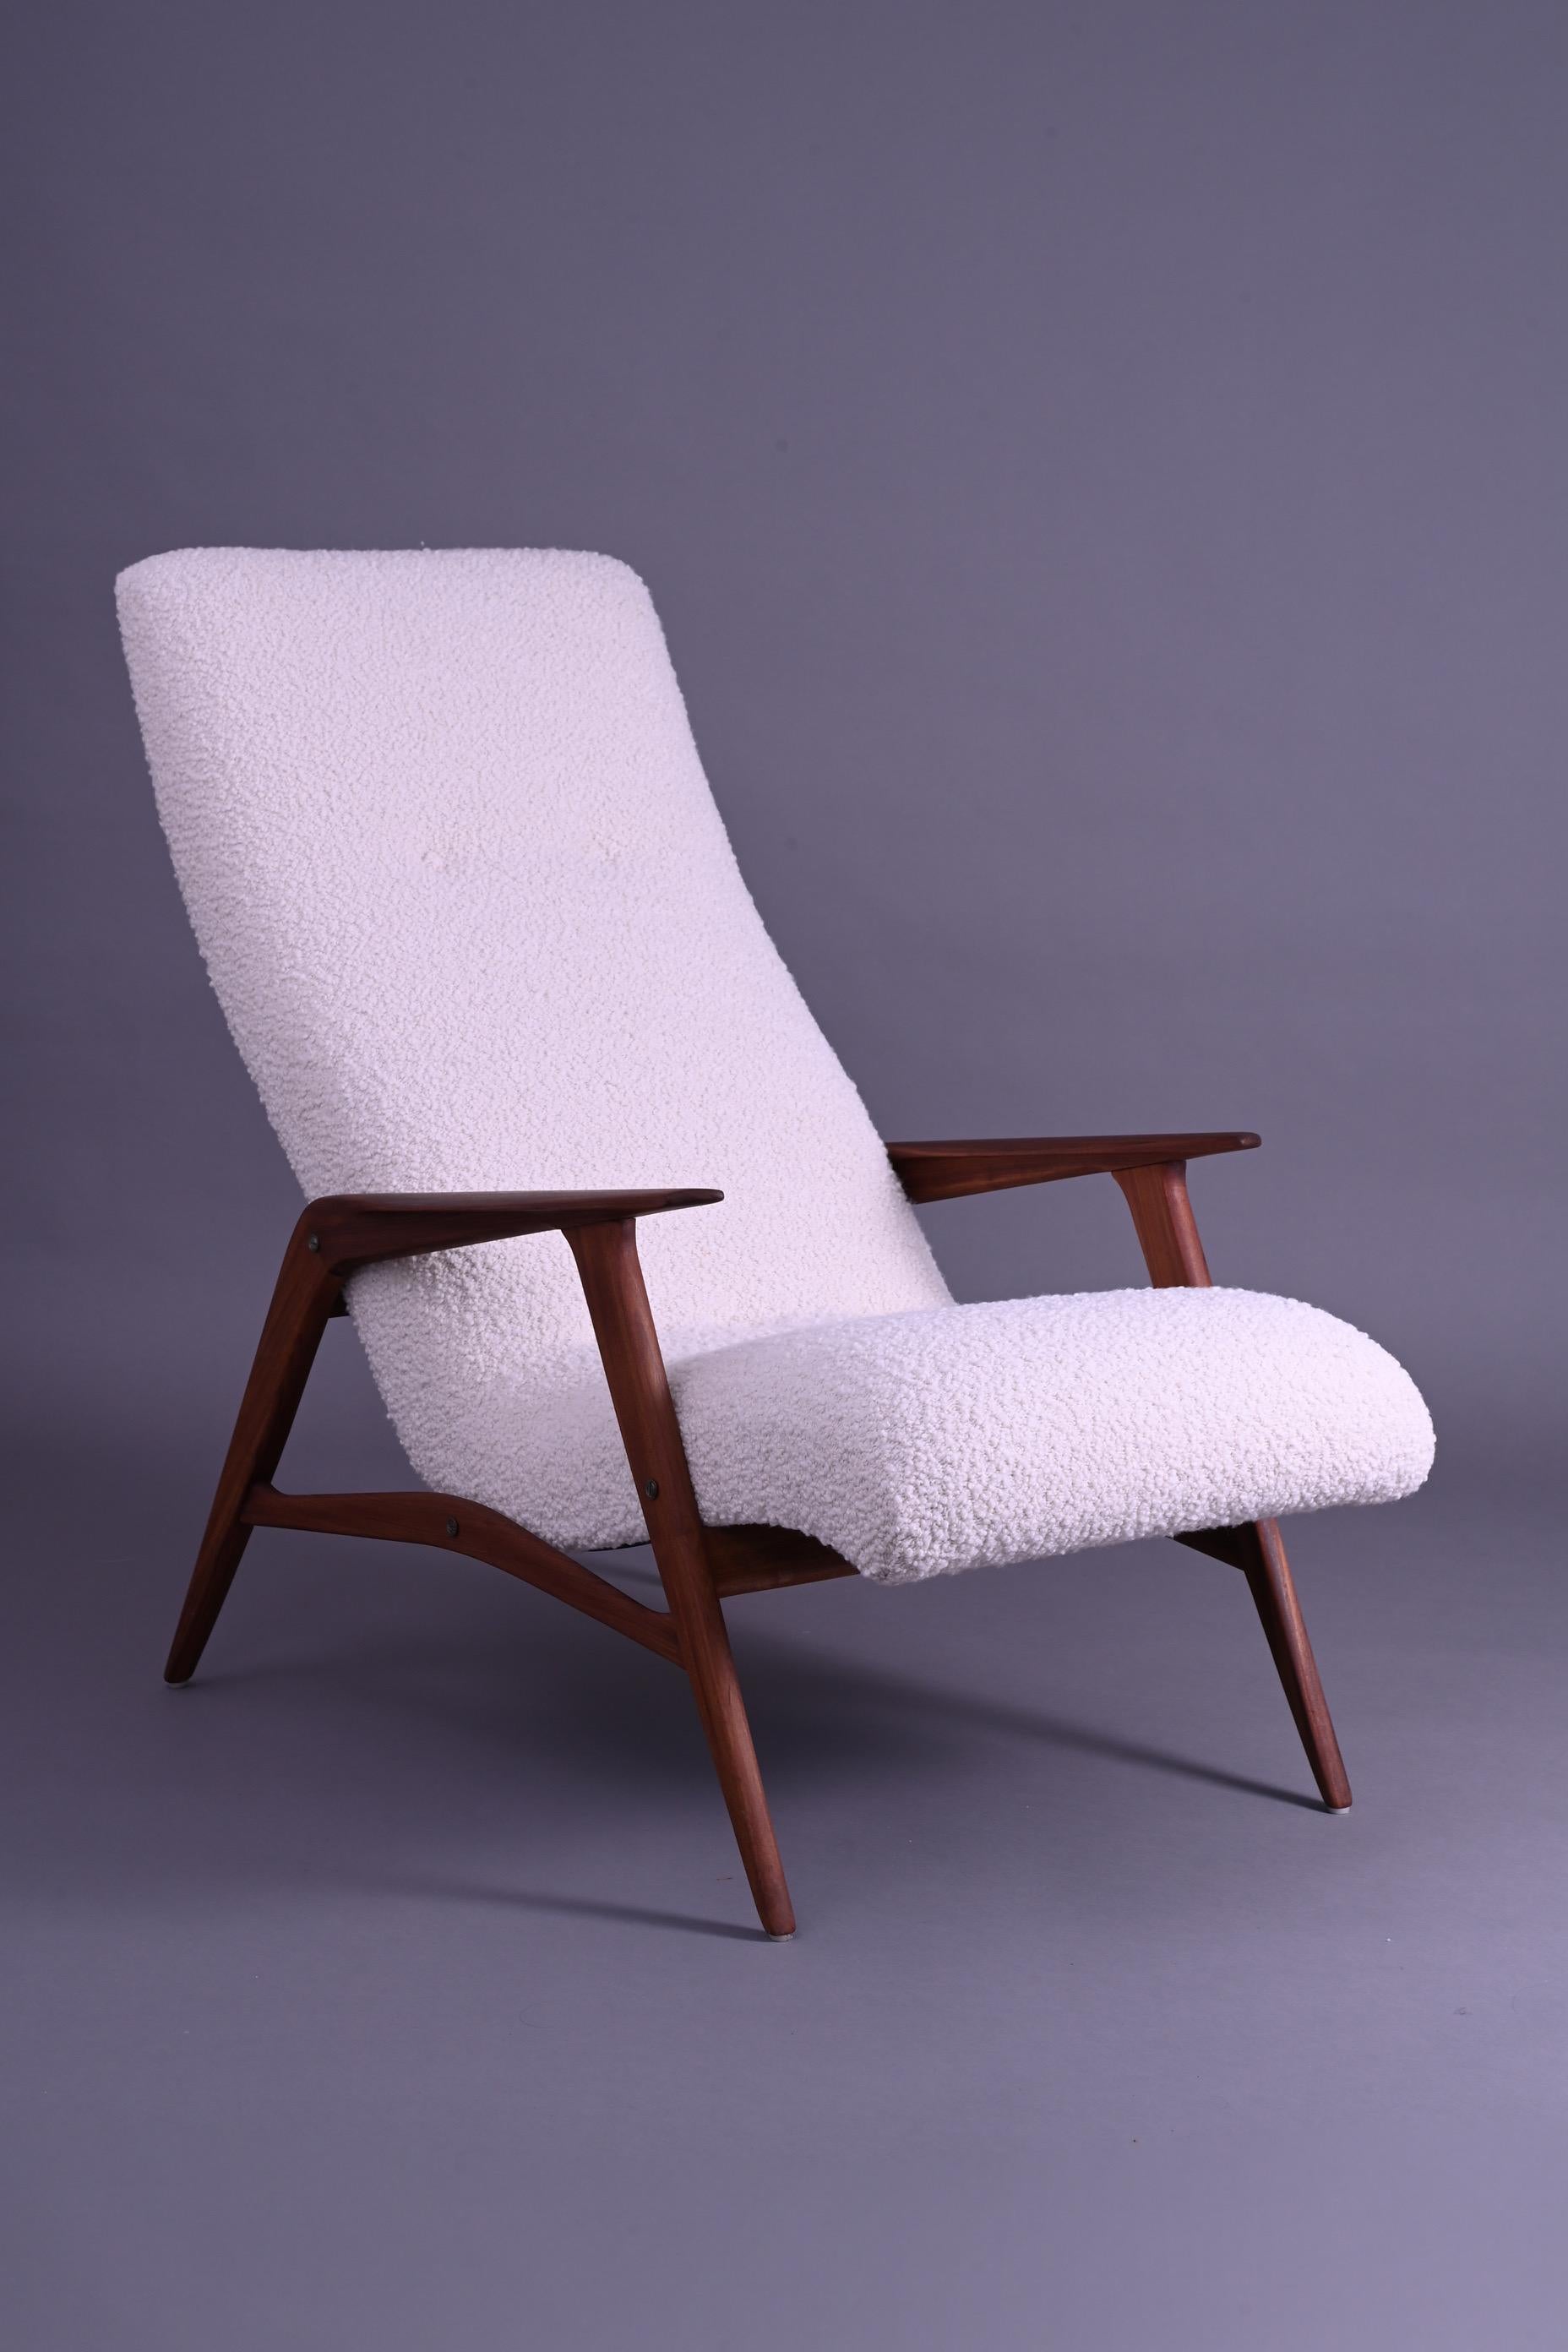 This wonderful & extremely rare example of a Siesta chair & ottoman produced by Jio Mobler of Sweden has been sympathetically restored from the ground up. The rich afromosia frame has been meticulously restored to its former glory, the brass accents